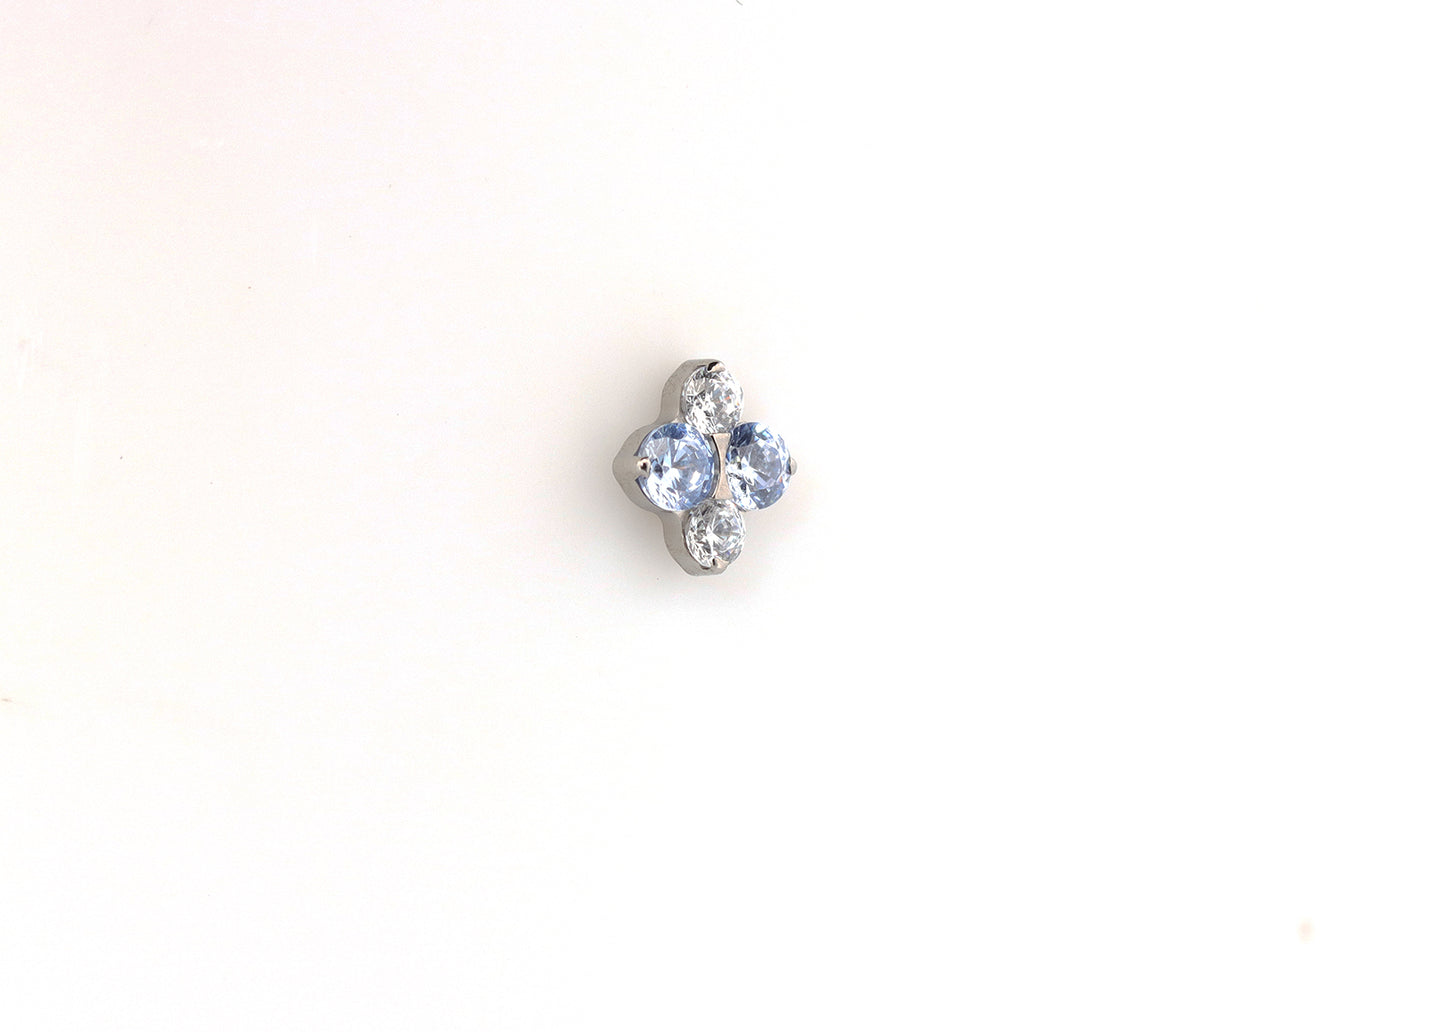 North Star Periwinkle Cubic Zirconia Threadless End